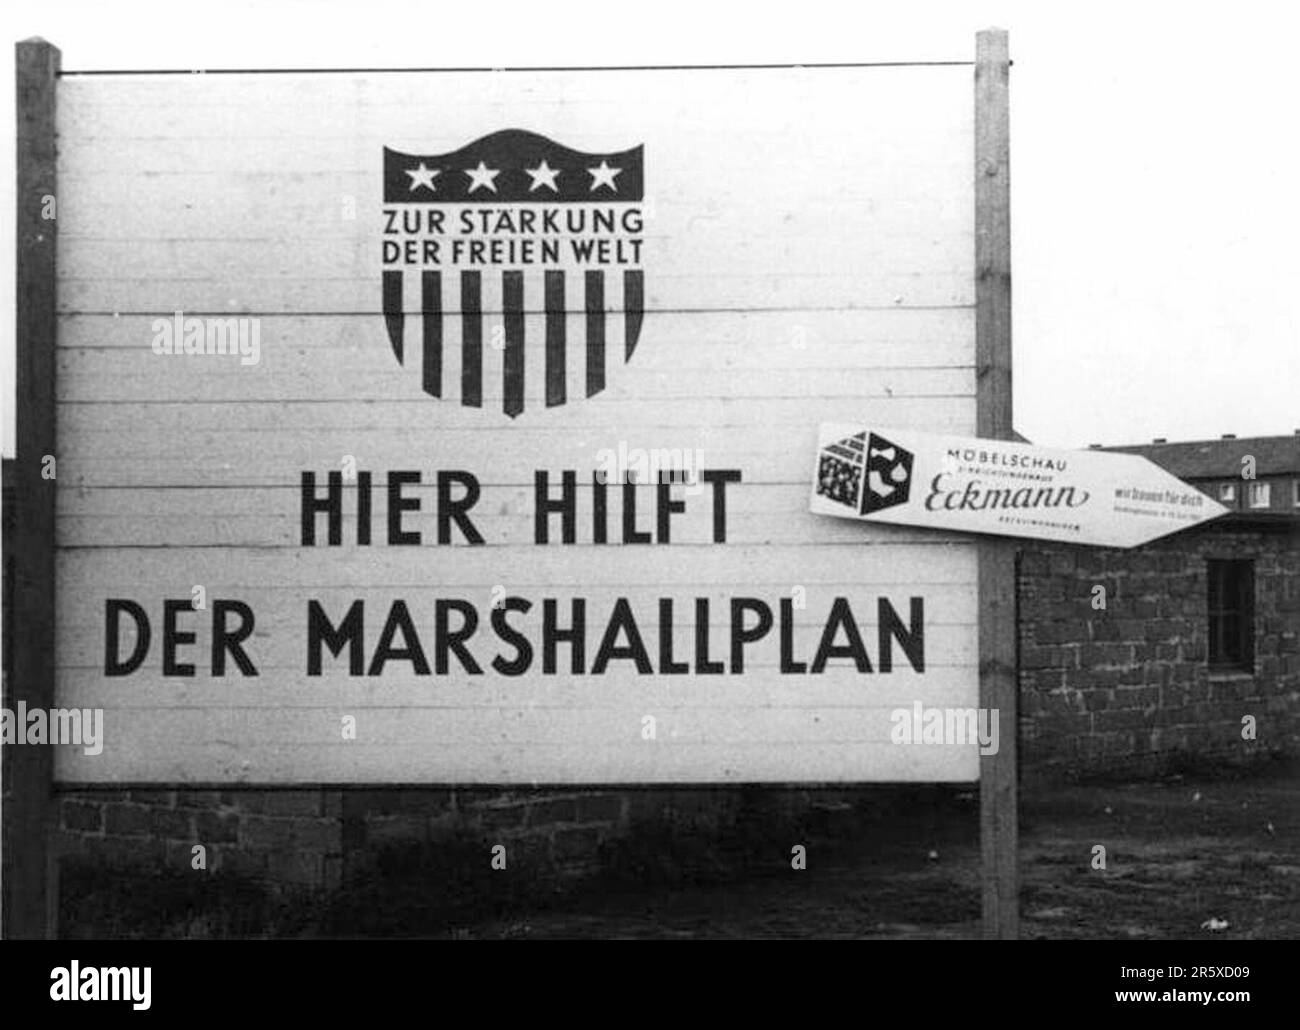 A sign in the Ruhr area of Germany advertising the presnece of The Marshall Plan in rebuilding. The Marshall Plan was a very ambitious financial aid program proposed by US Secretary of State George Marshall. He understood that a destroyed and prostrate Europe had to have financial help if it were to recover and to remove the threat of communist insurgency. The aid was given not lent and each country decided on how it would use the funds. In the three years of the program the US gave Europe $13 billion, a colossal sum worth $175 billion at todays values. This far-seeing and generous plan was a Stock Photo